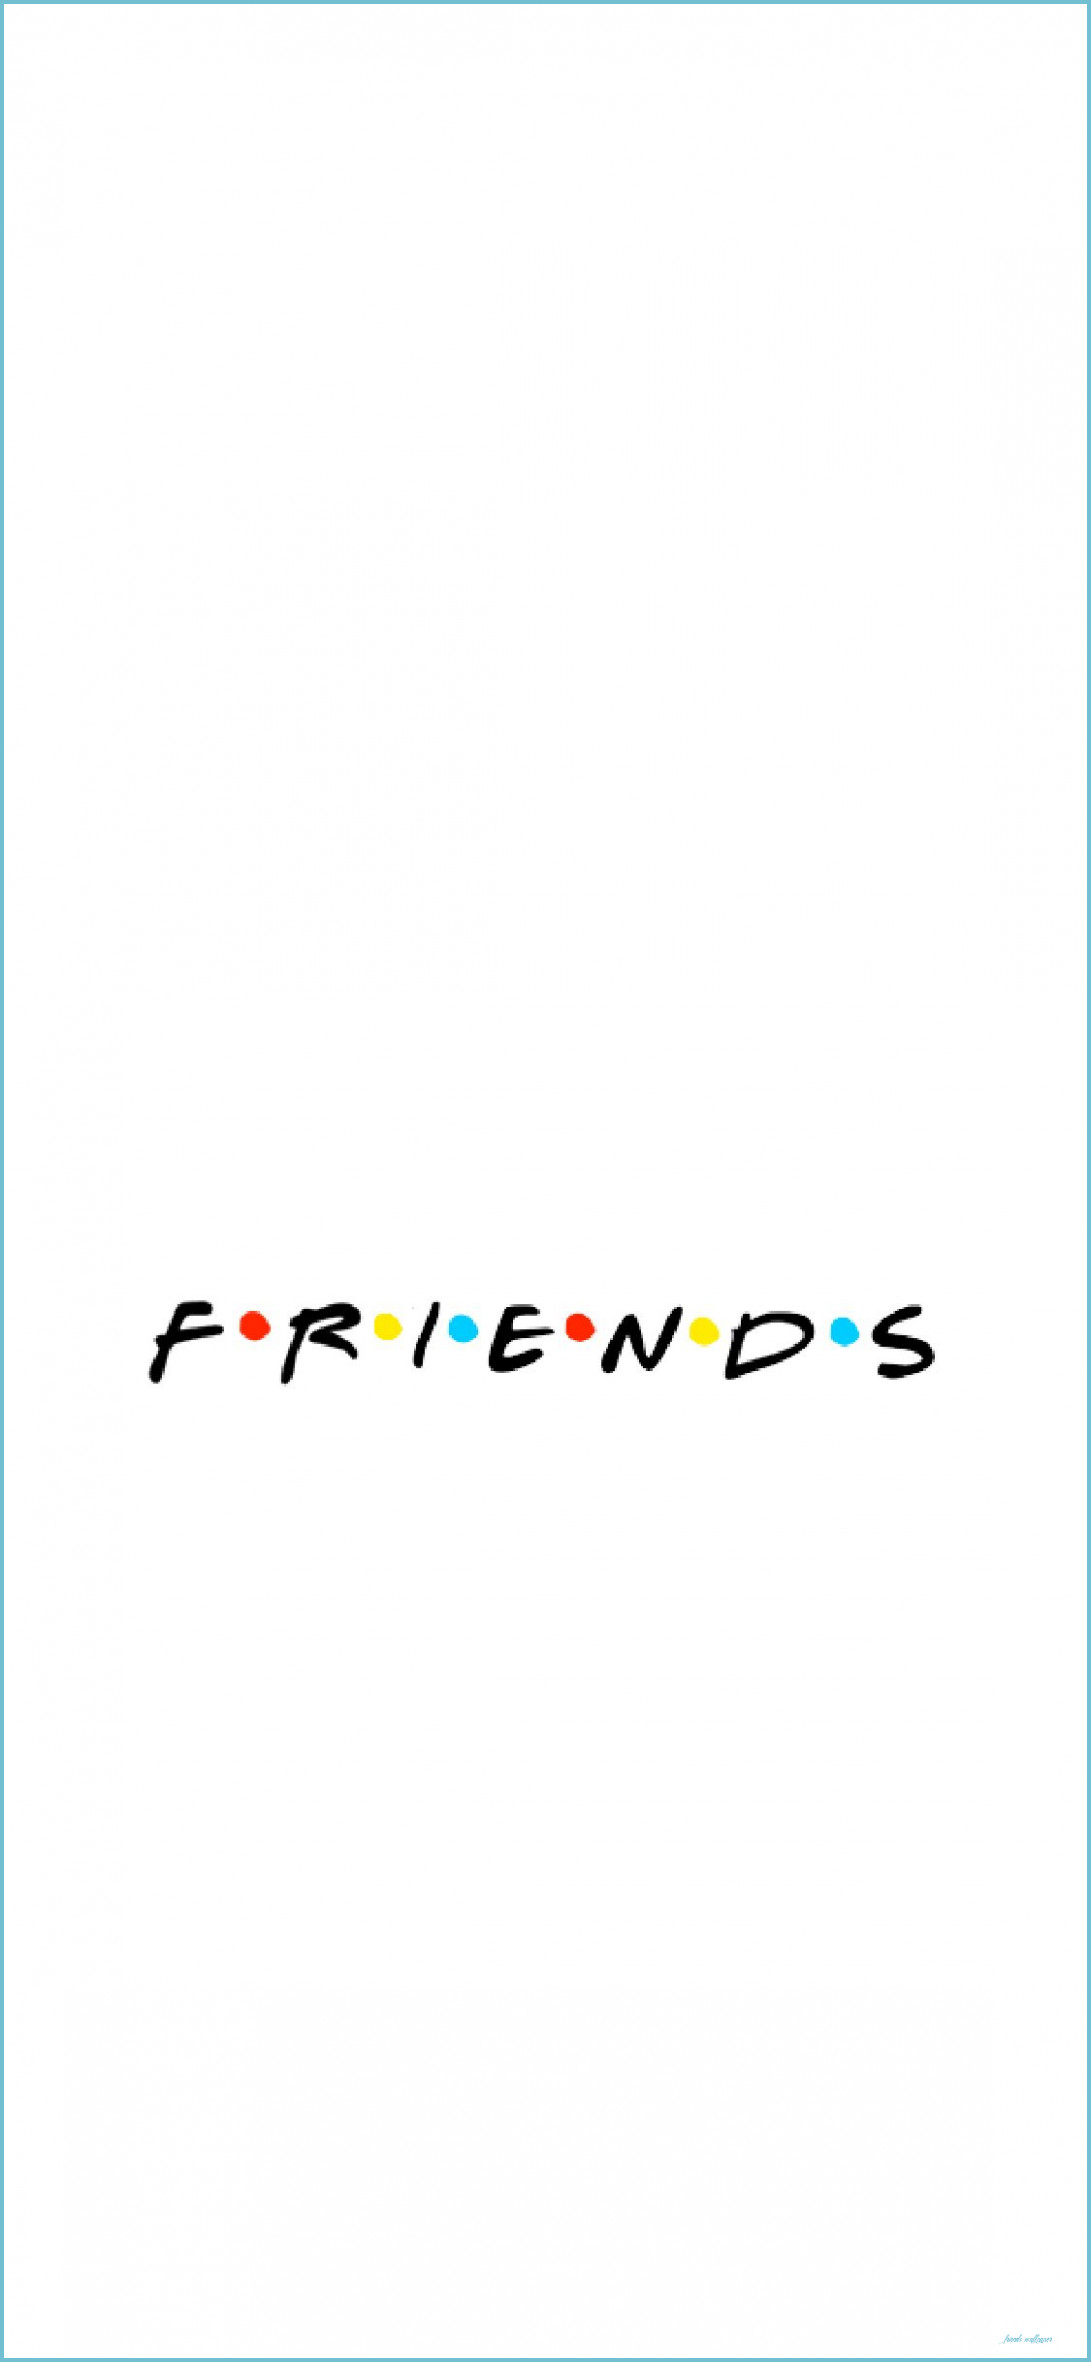 Funny Friends Tv Show IPhone Wallpaper Cool Wallpaper For